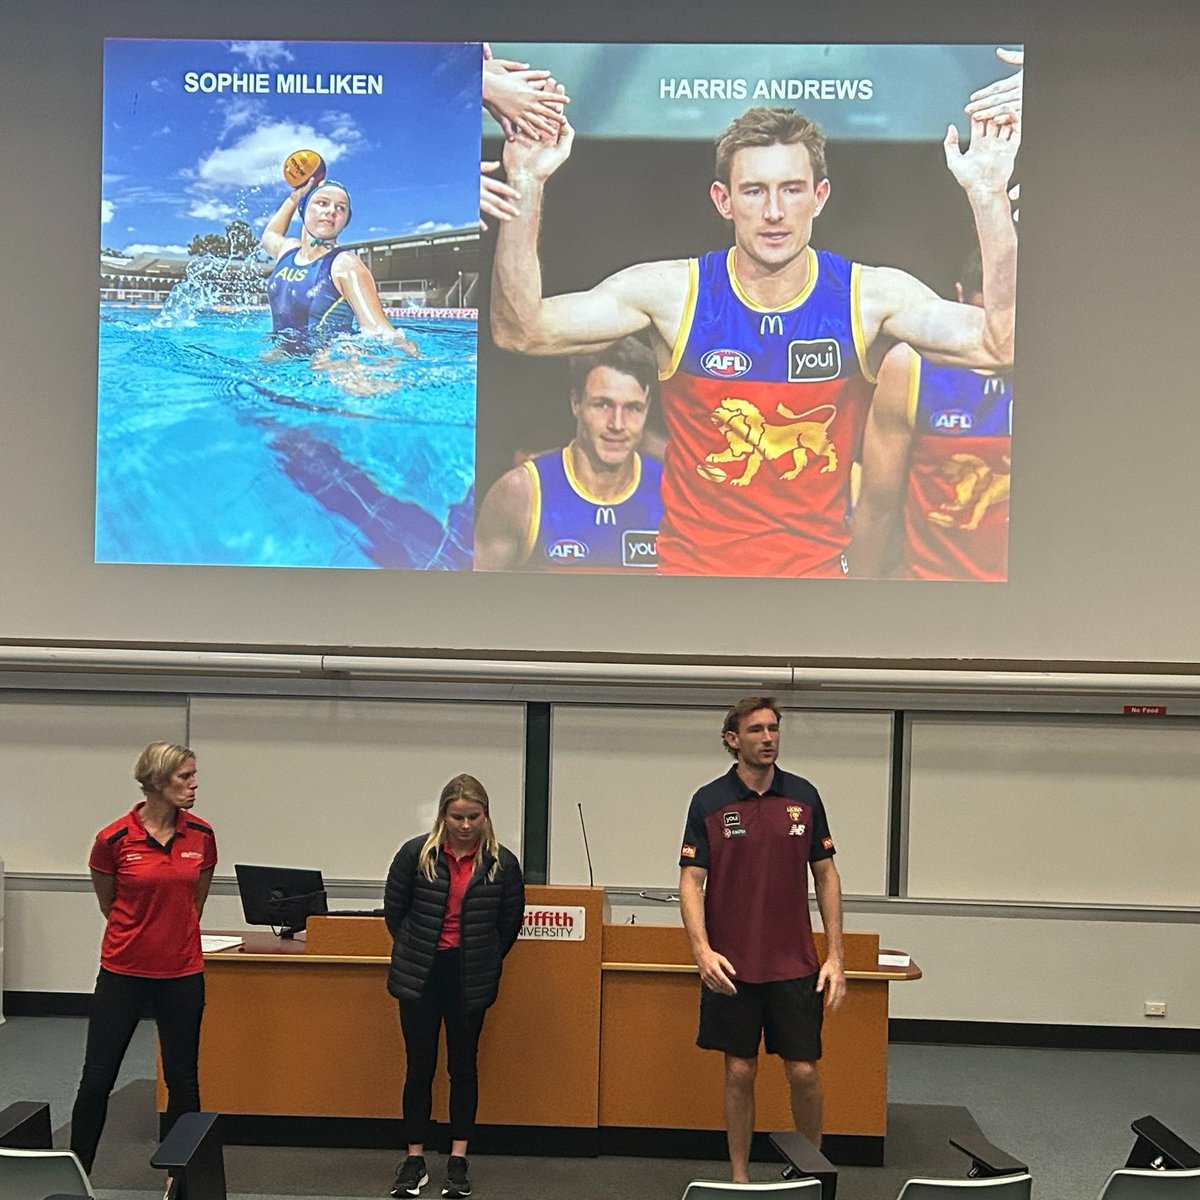 . @brisbanelions co-captain and Griffith student, Harris Andrews, gave our Nathan campus a visit today to chat to some young athletes and inspire the next generation! 👏 @Griffith_GSC